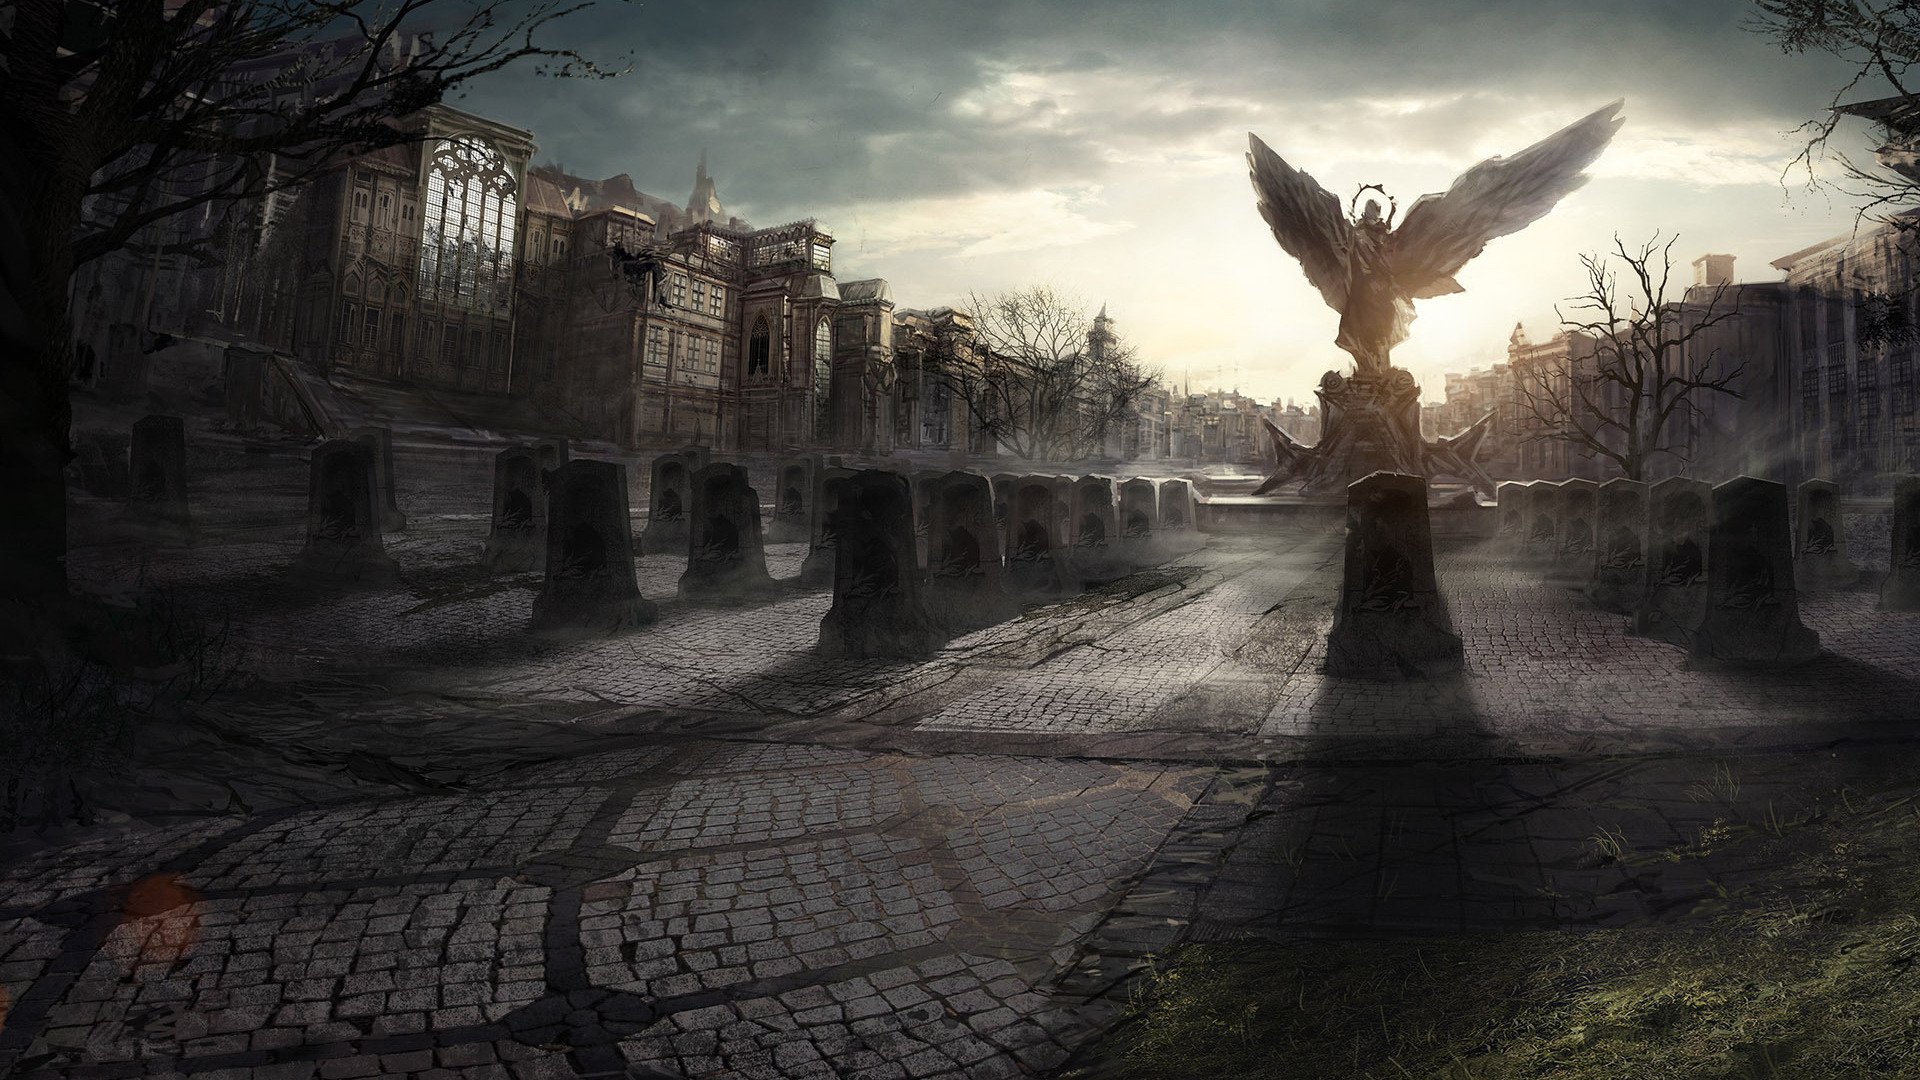 angels and demons statue wallpaper